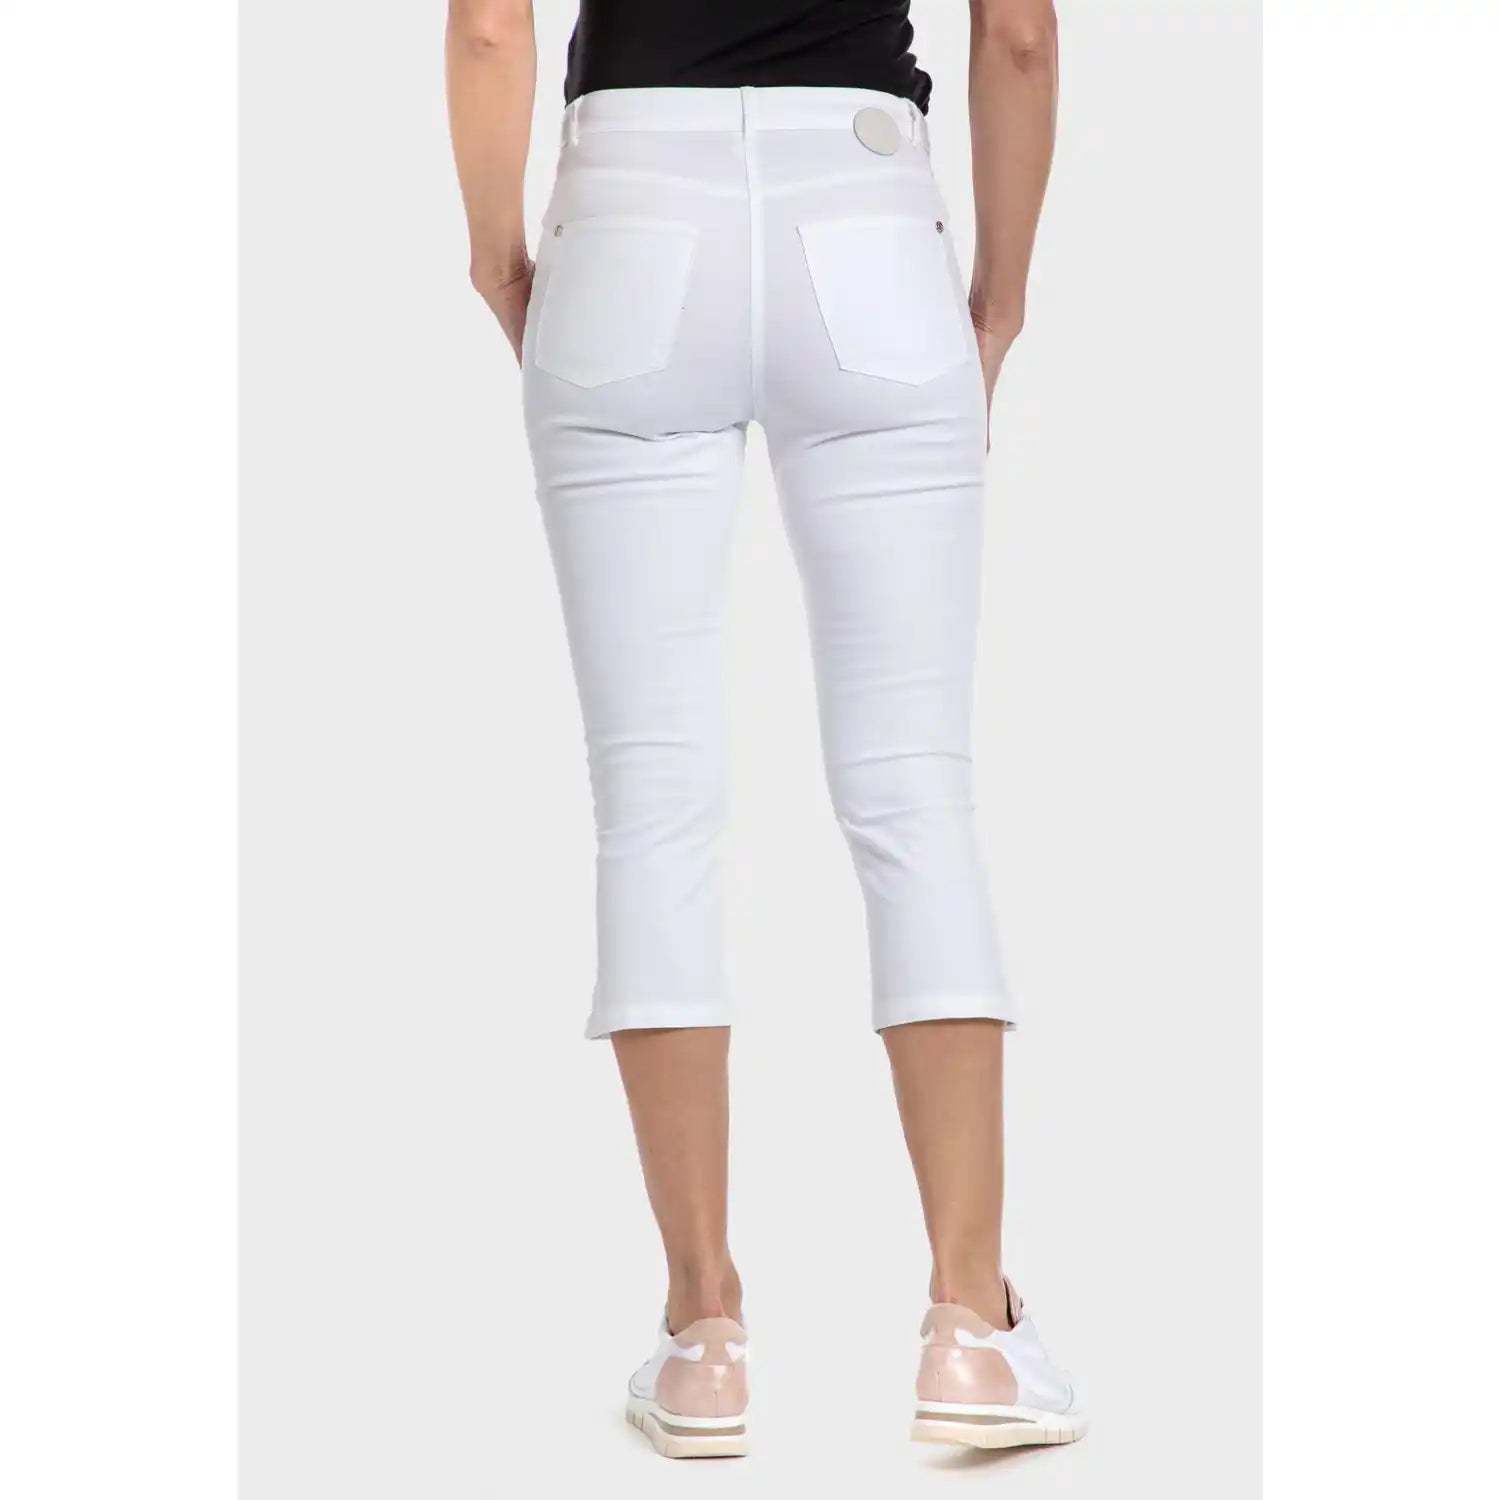 Punt Roma Cotton Crop Trousers - White 2 Shaws Department Stores